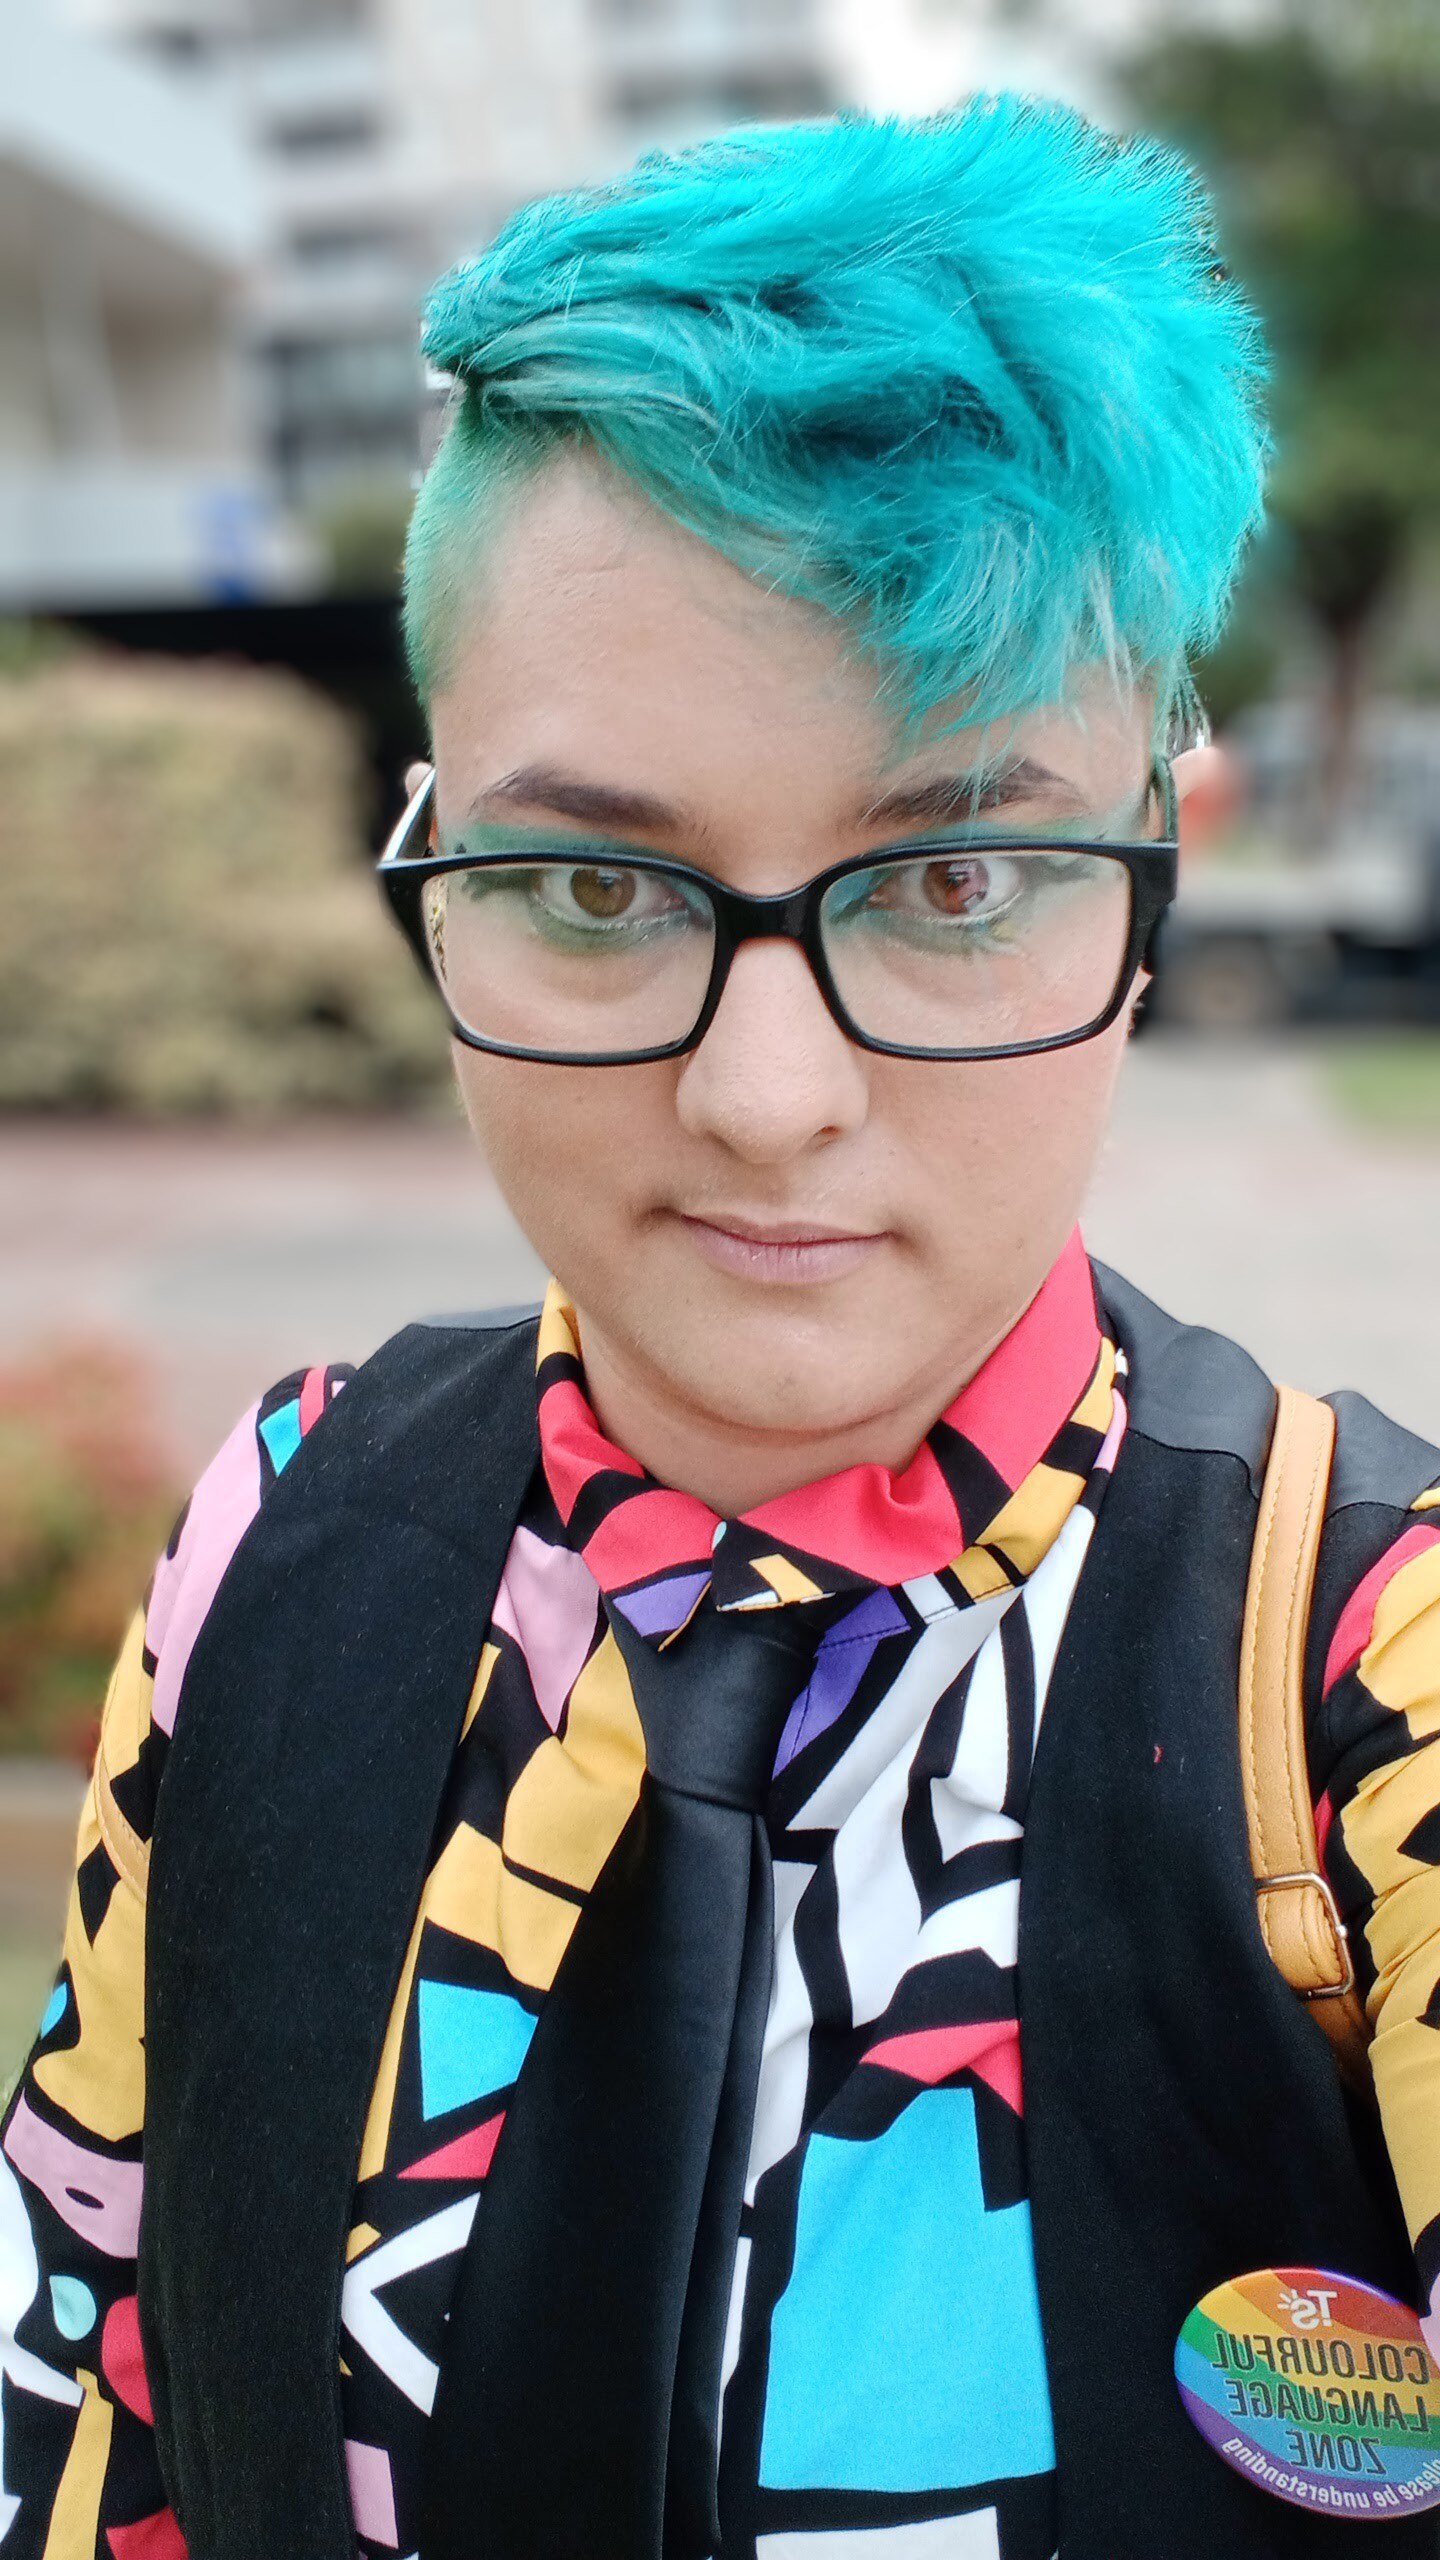 A person with turquoise hair and a colourful shirt smiles gently